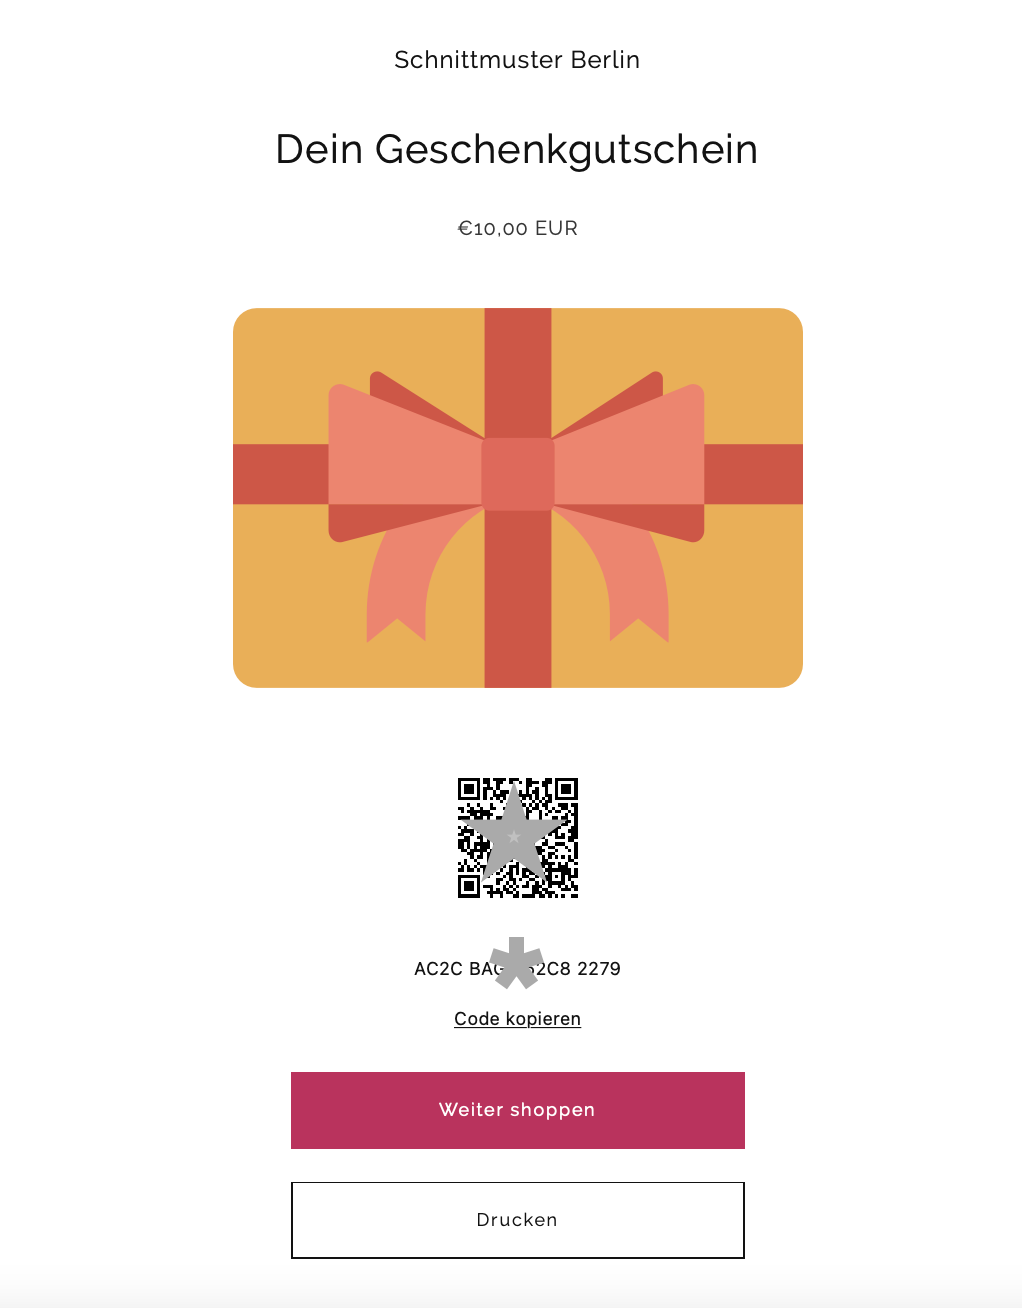 The Sewing Pattern Berlin gift voucher